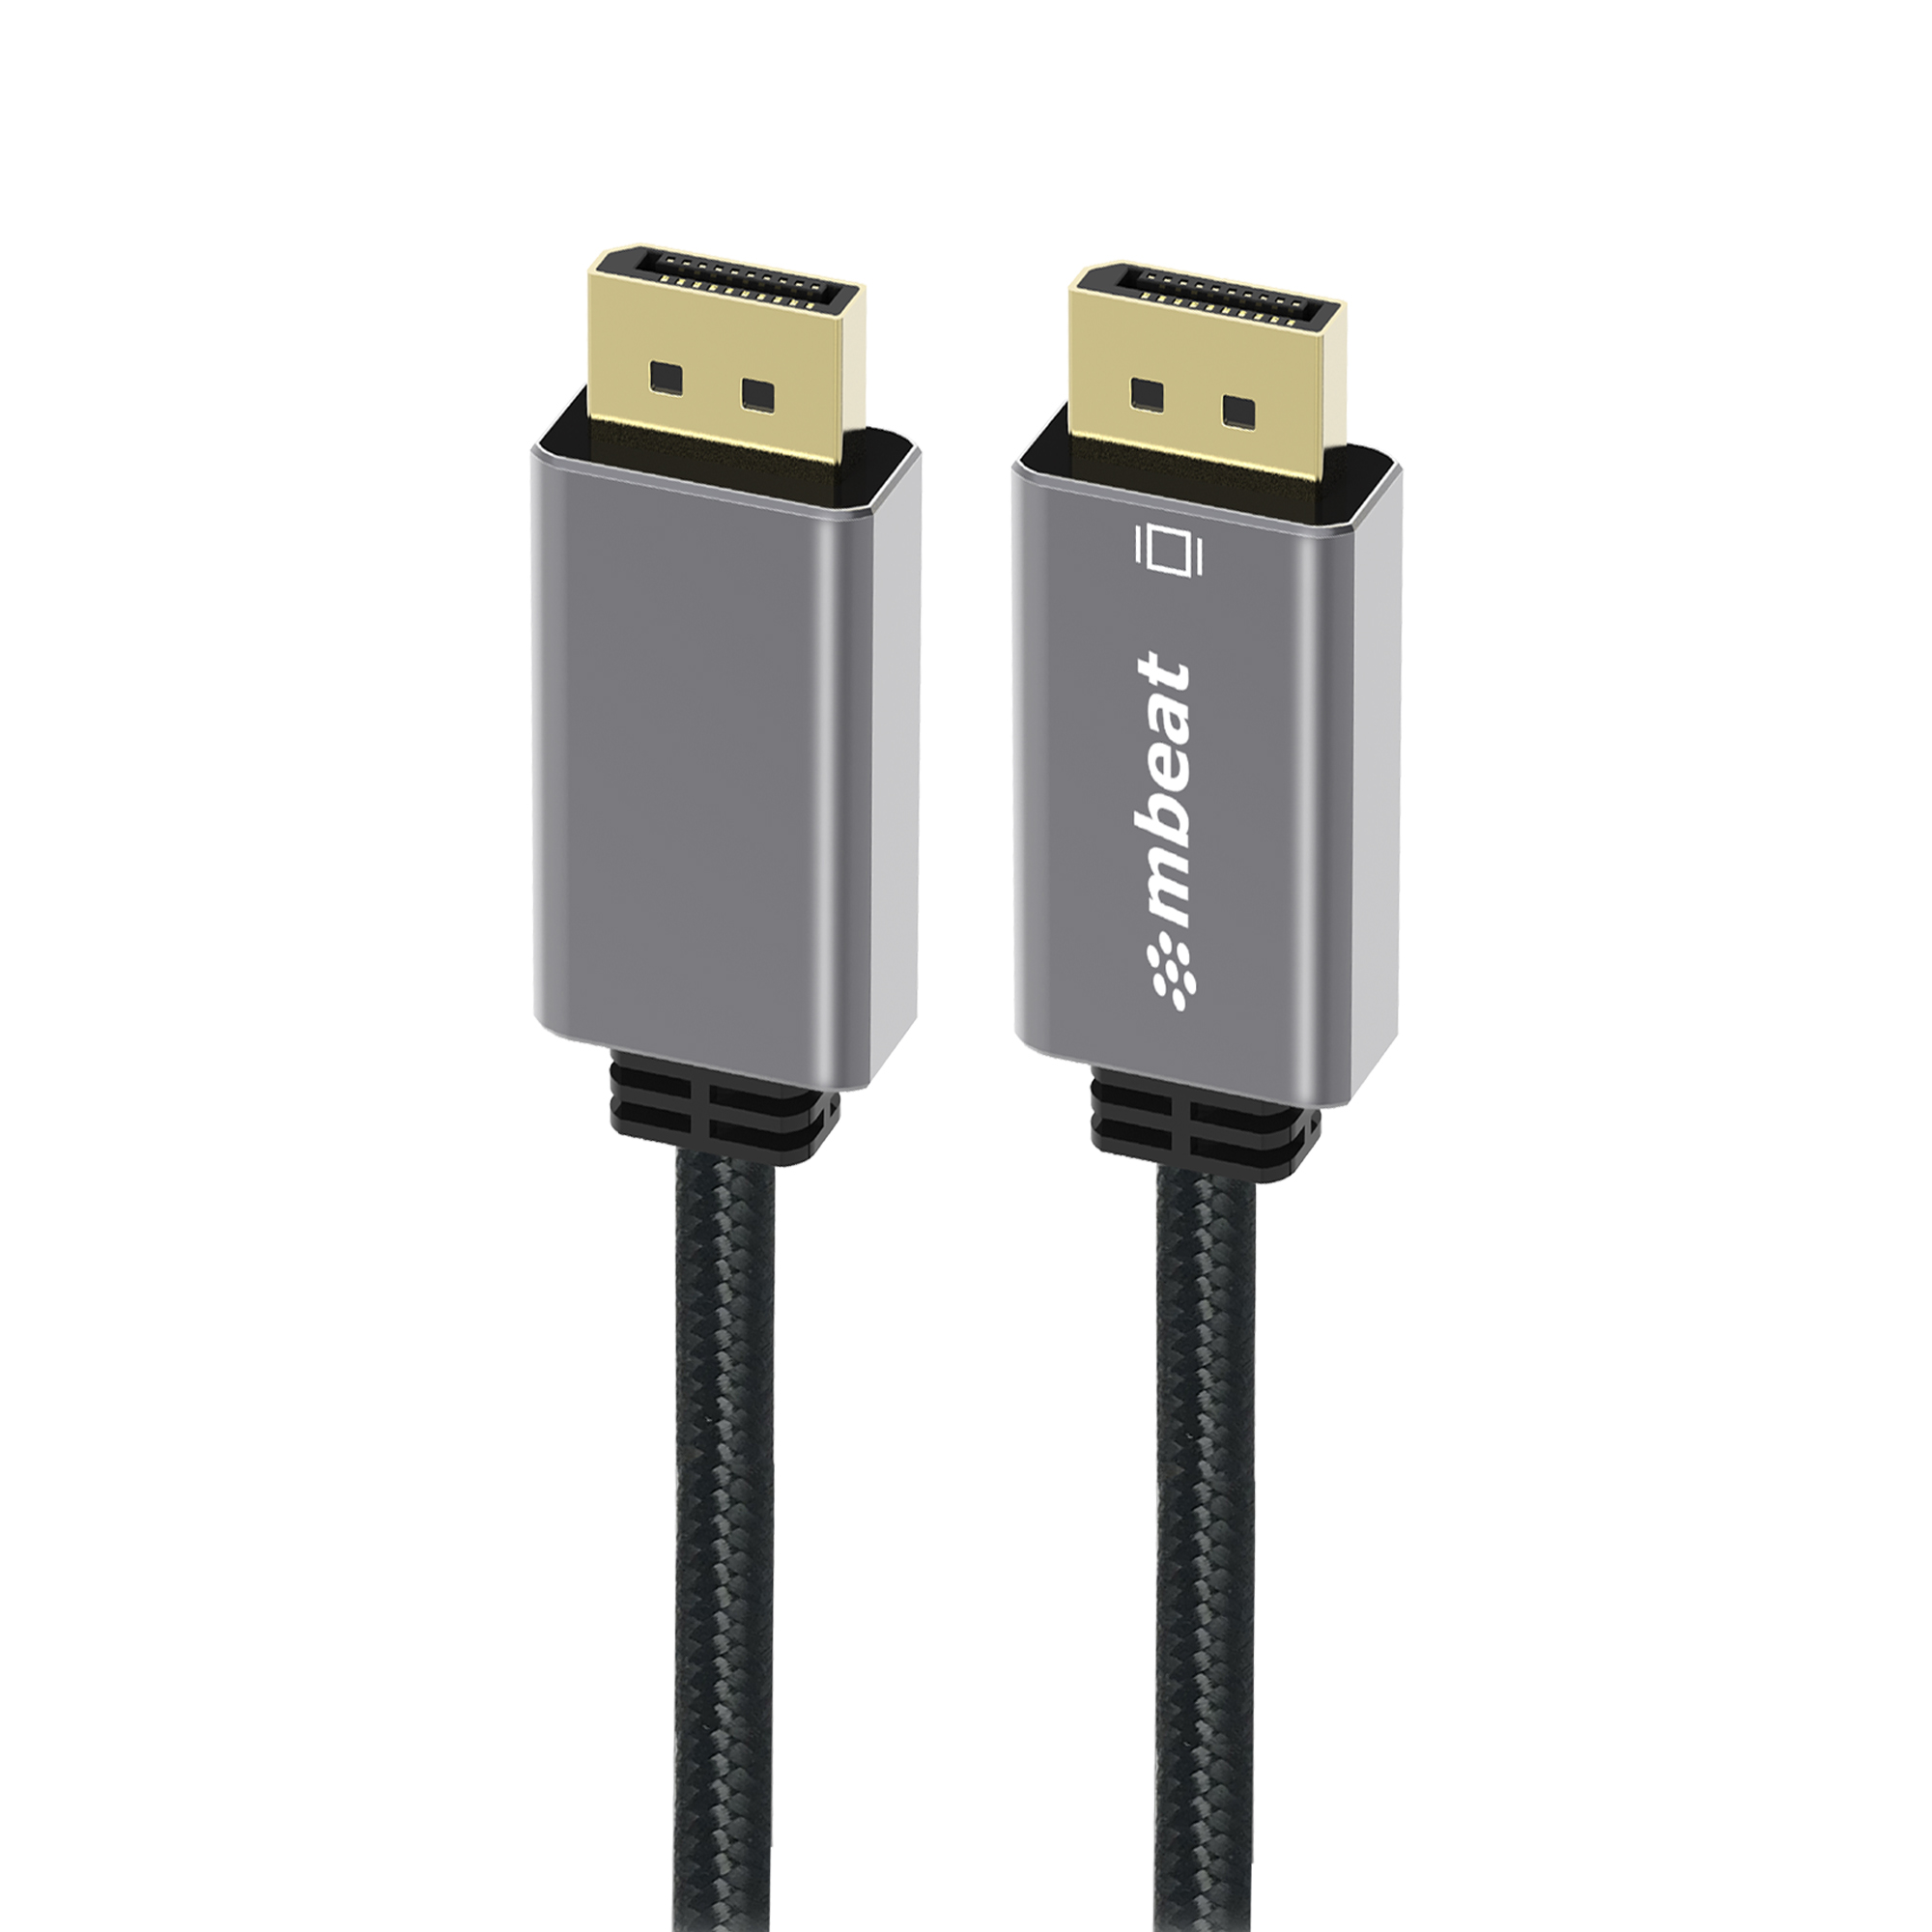 Adapters/MBEAT: mbeat, Tough, Link, 1.8m, Display, Port, Cable, v1.4, -, Space, Grey, 